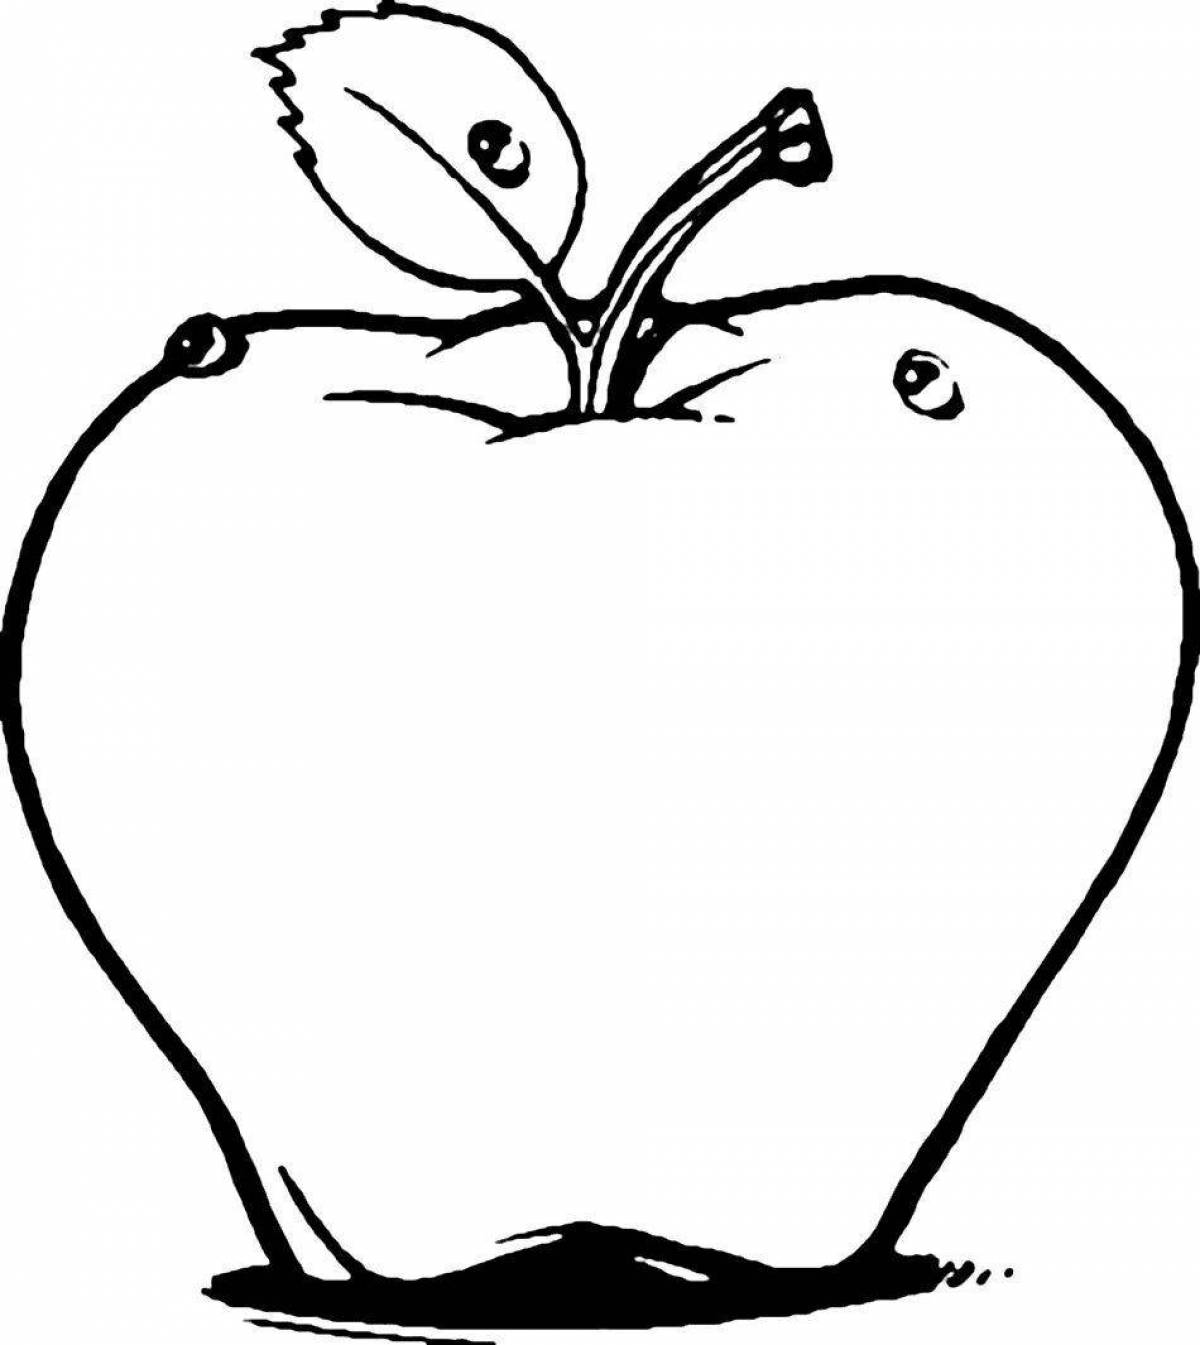 Cute drawing of an apple